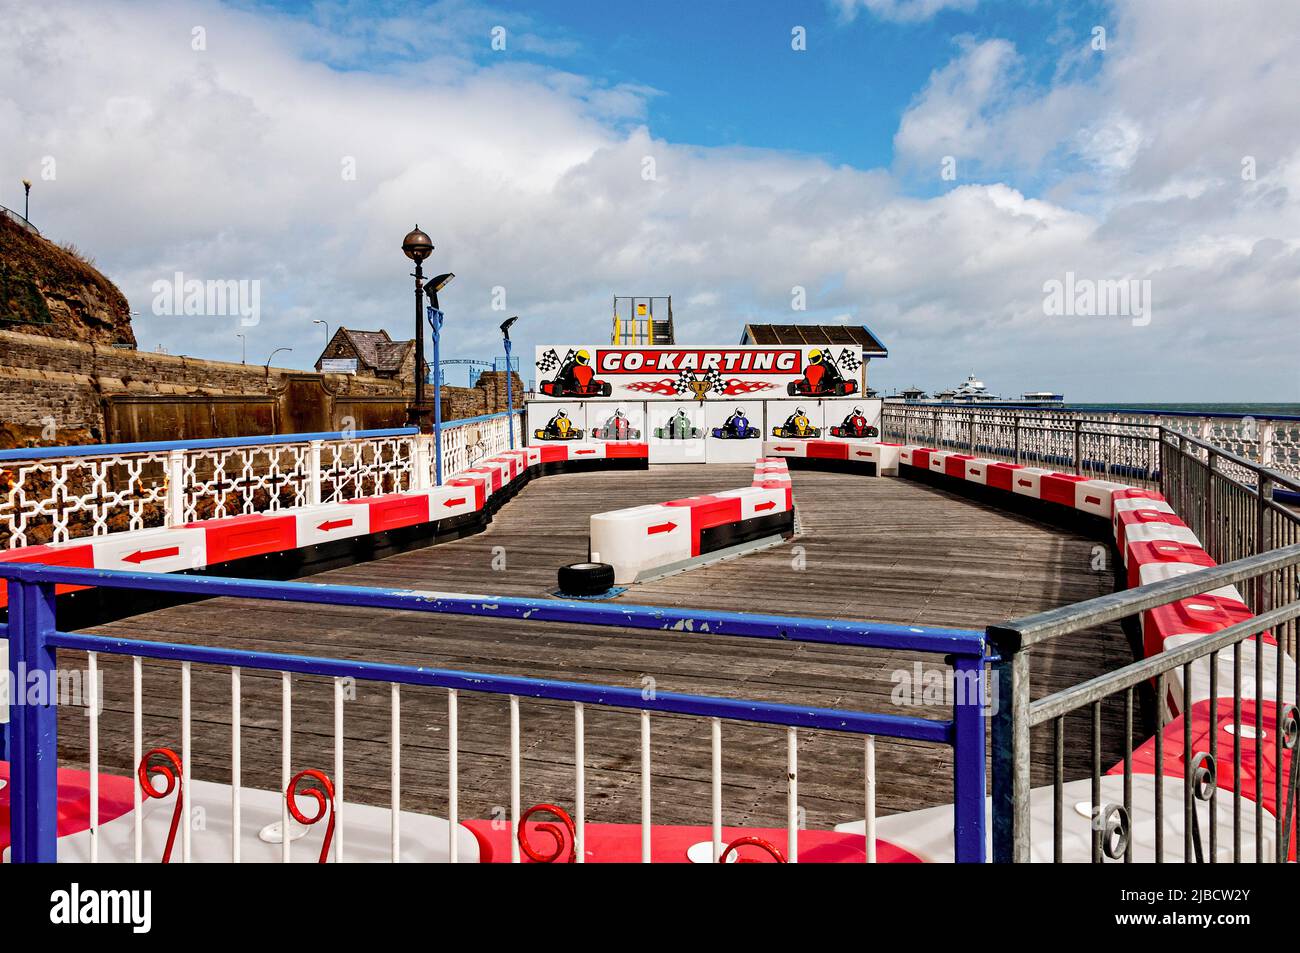 A red and white Go-karting track stands on the decking of the Grade ll listed Victorian Llandudno Pier with its many interesting kiosks and amusements Stock Photo